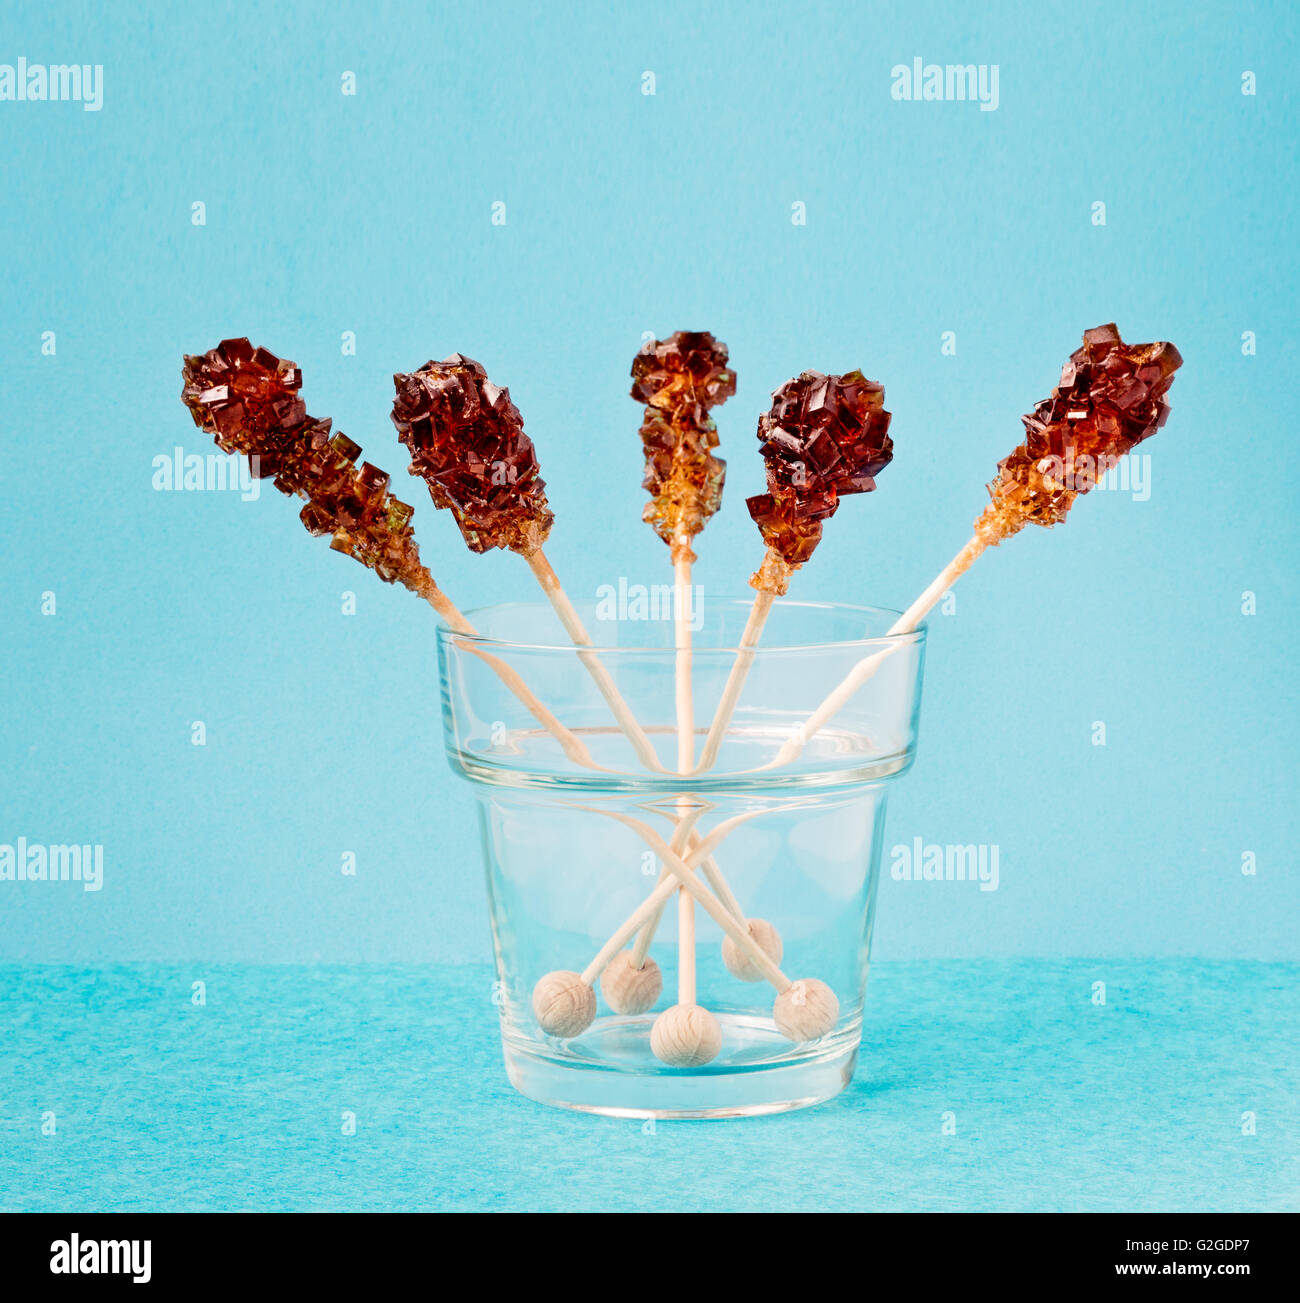 Five brown sugar stirrers in a glass on a light blue background. Stock Photo